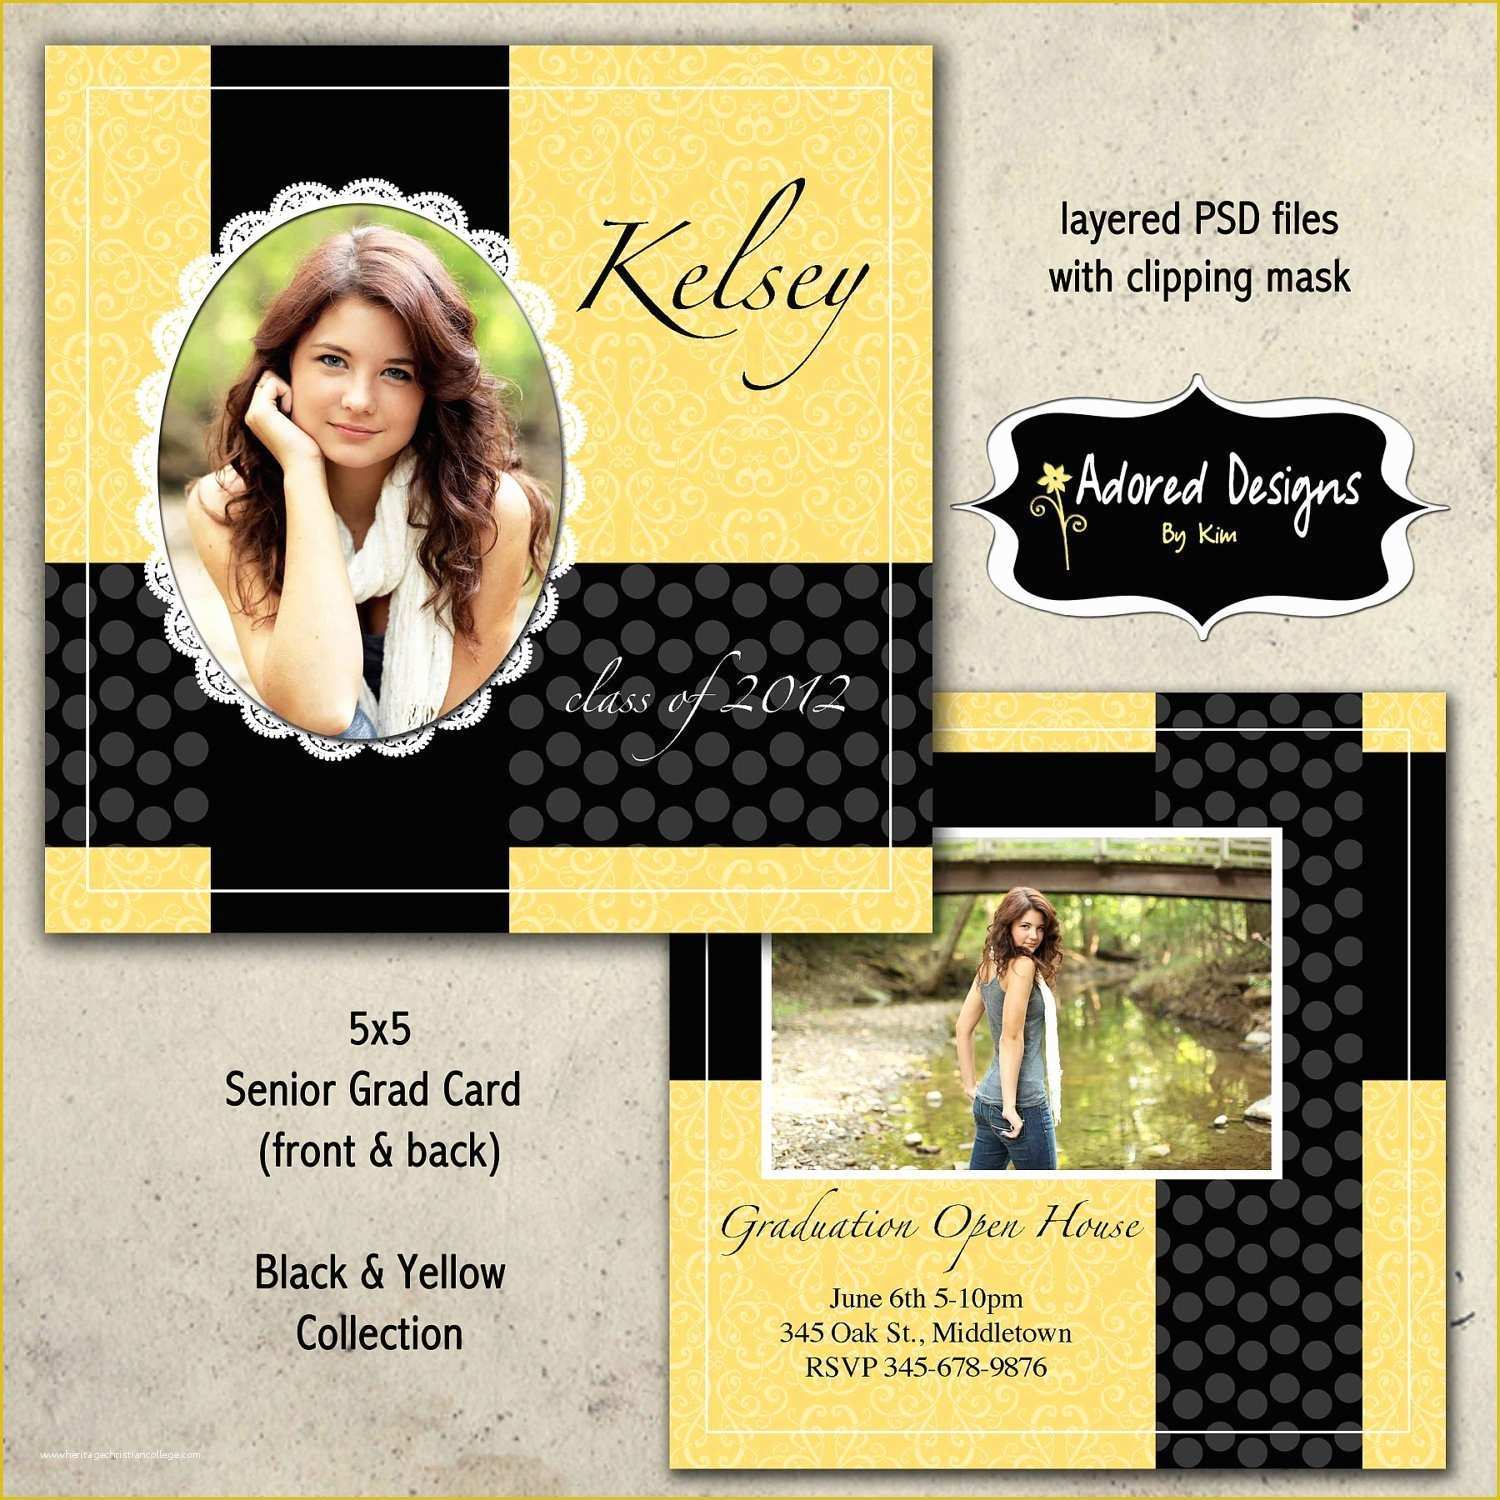 Free Graduation Announcements Templates Of Free Graduation Invitation Templates Free Graduation